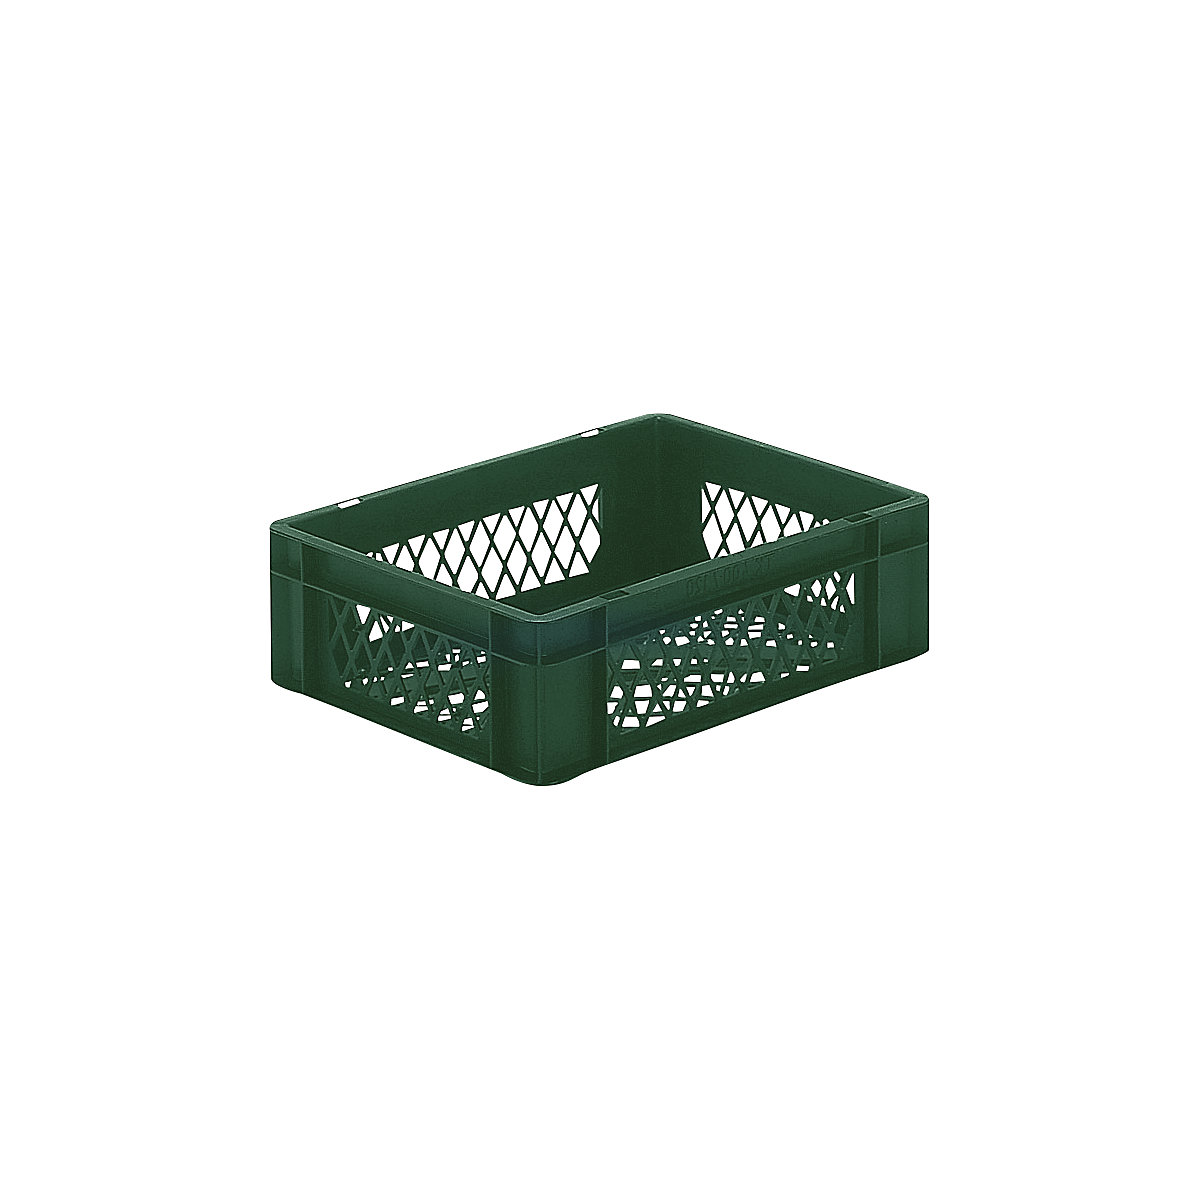 Euro stacking container, perforated walls and base, LxWxH 400 x 300 x 120 mm, green, pack of 5-7